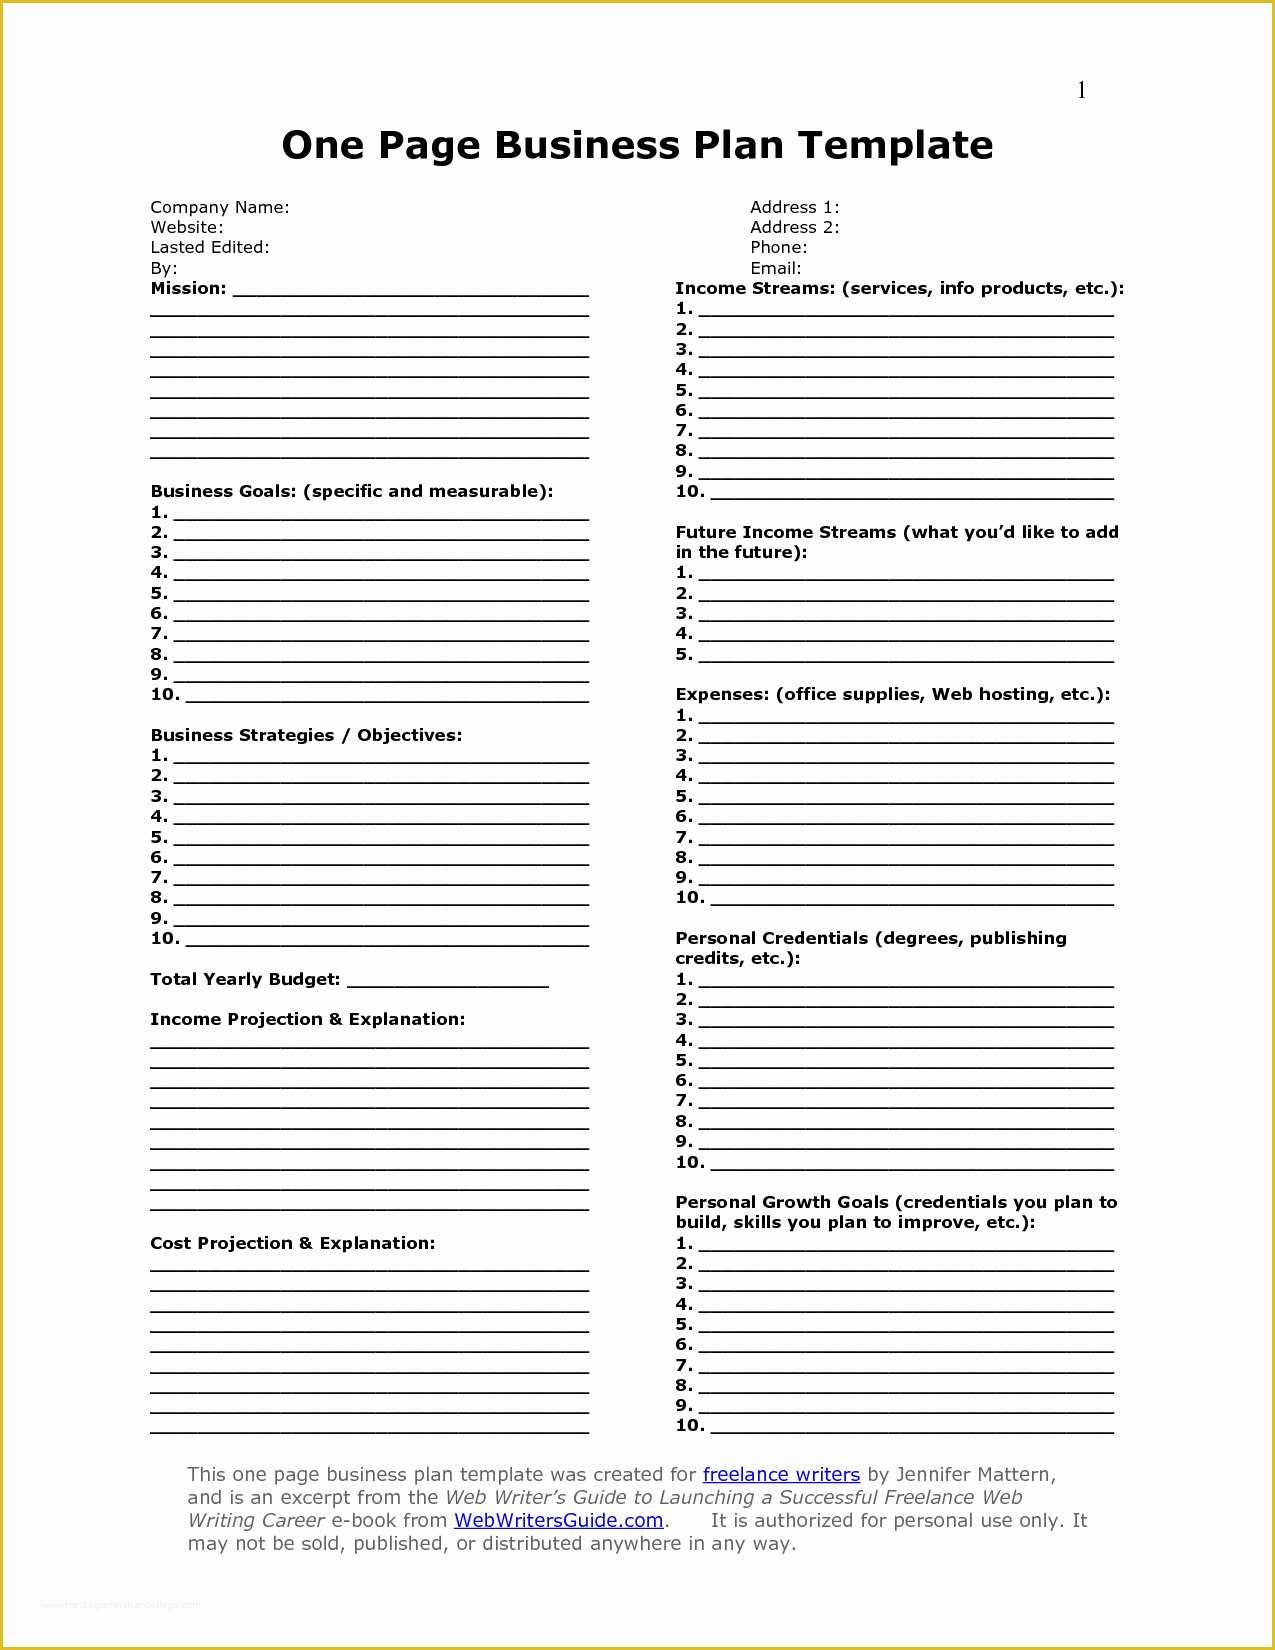 Business Plan Template Free Of E Page Business Plan Template